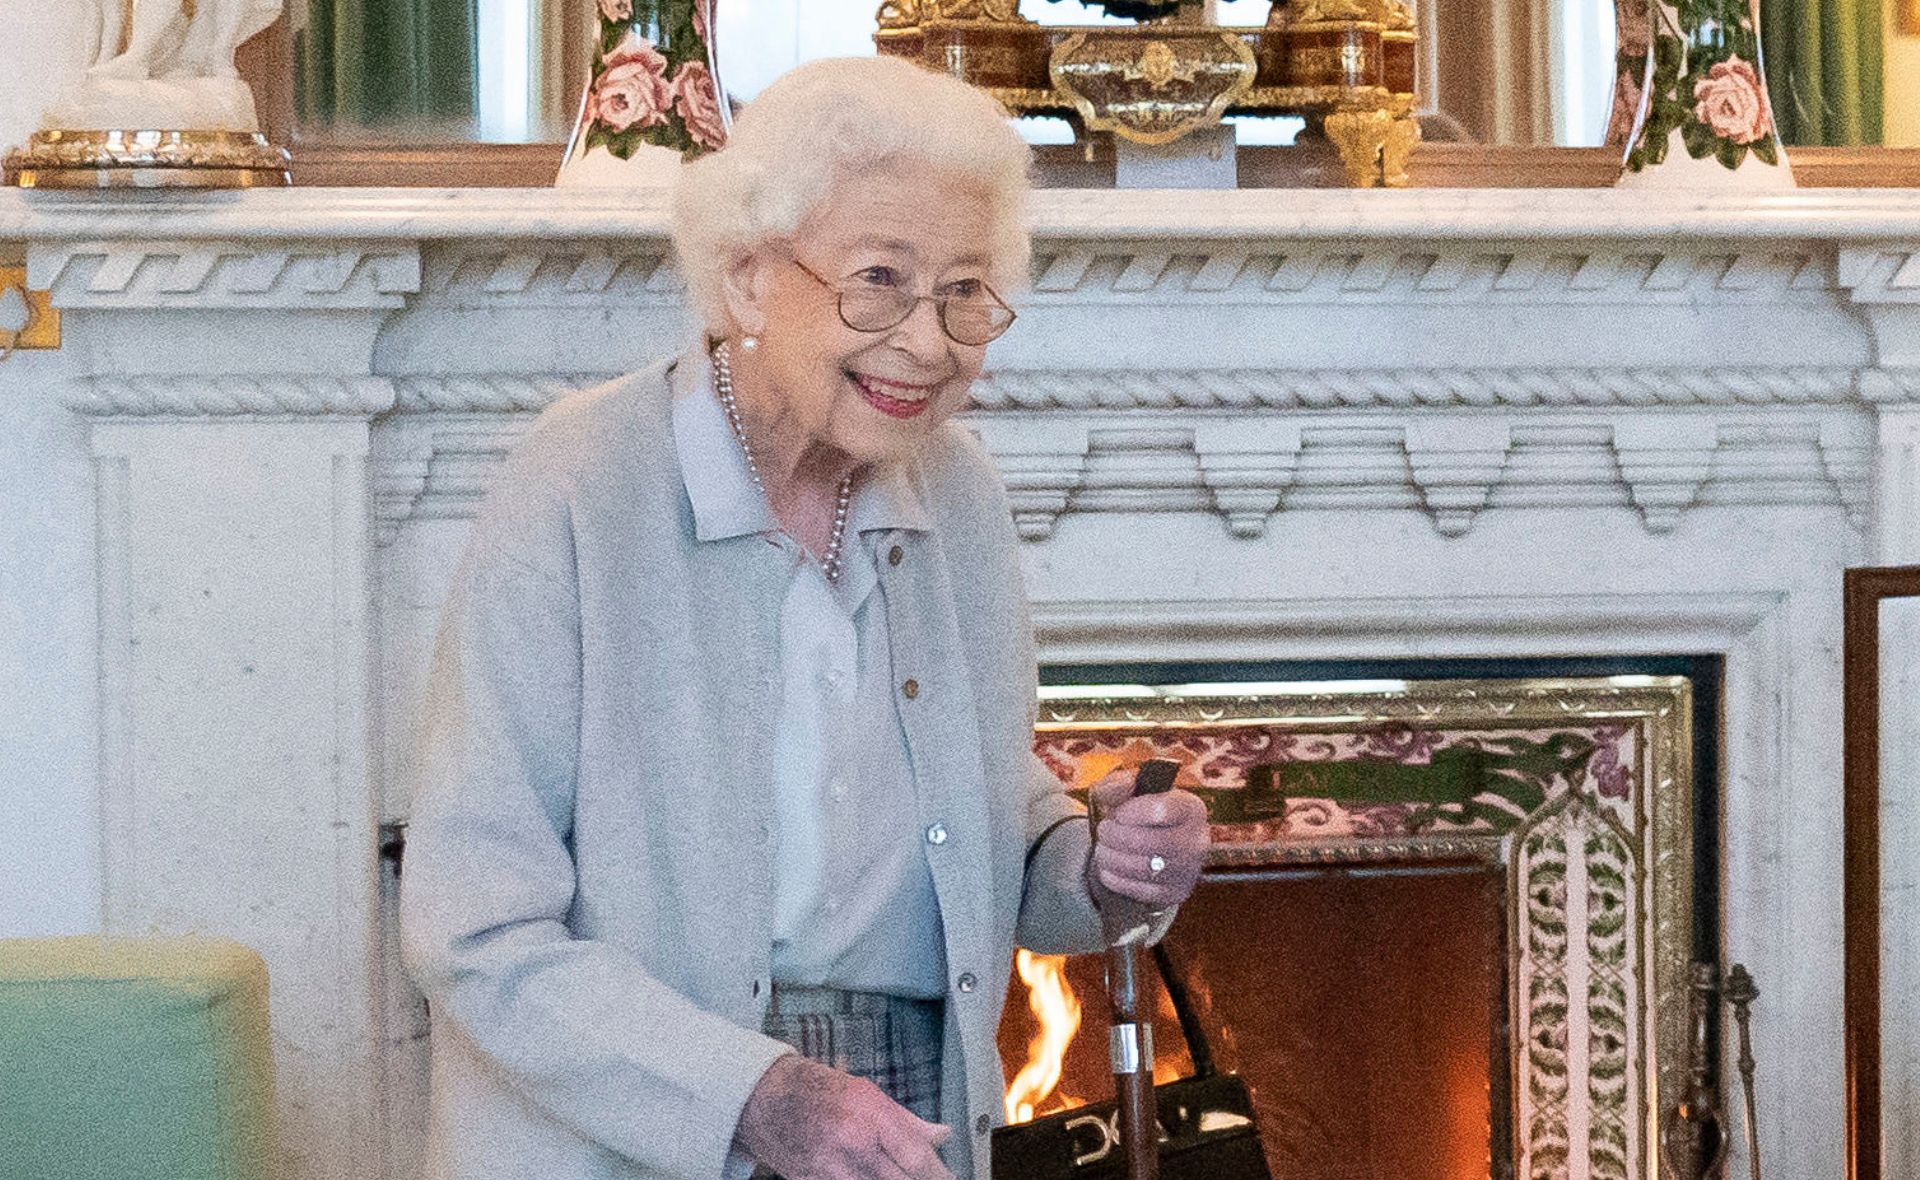 Here’s where to watch The Queen’s funeral in Australia